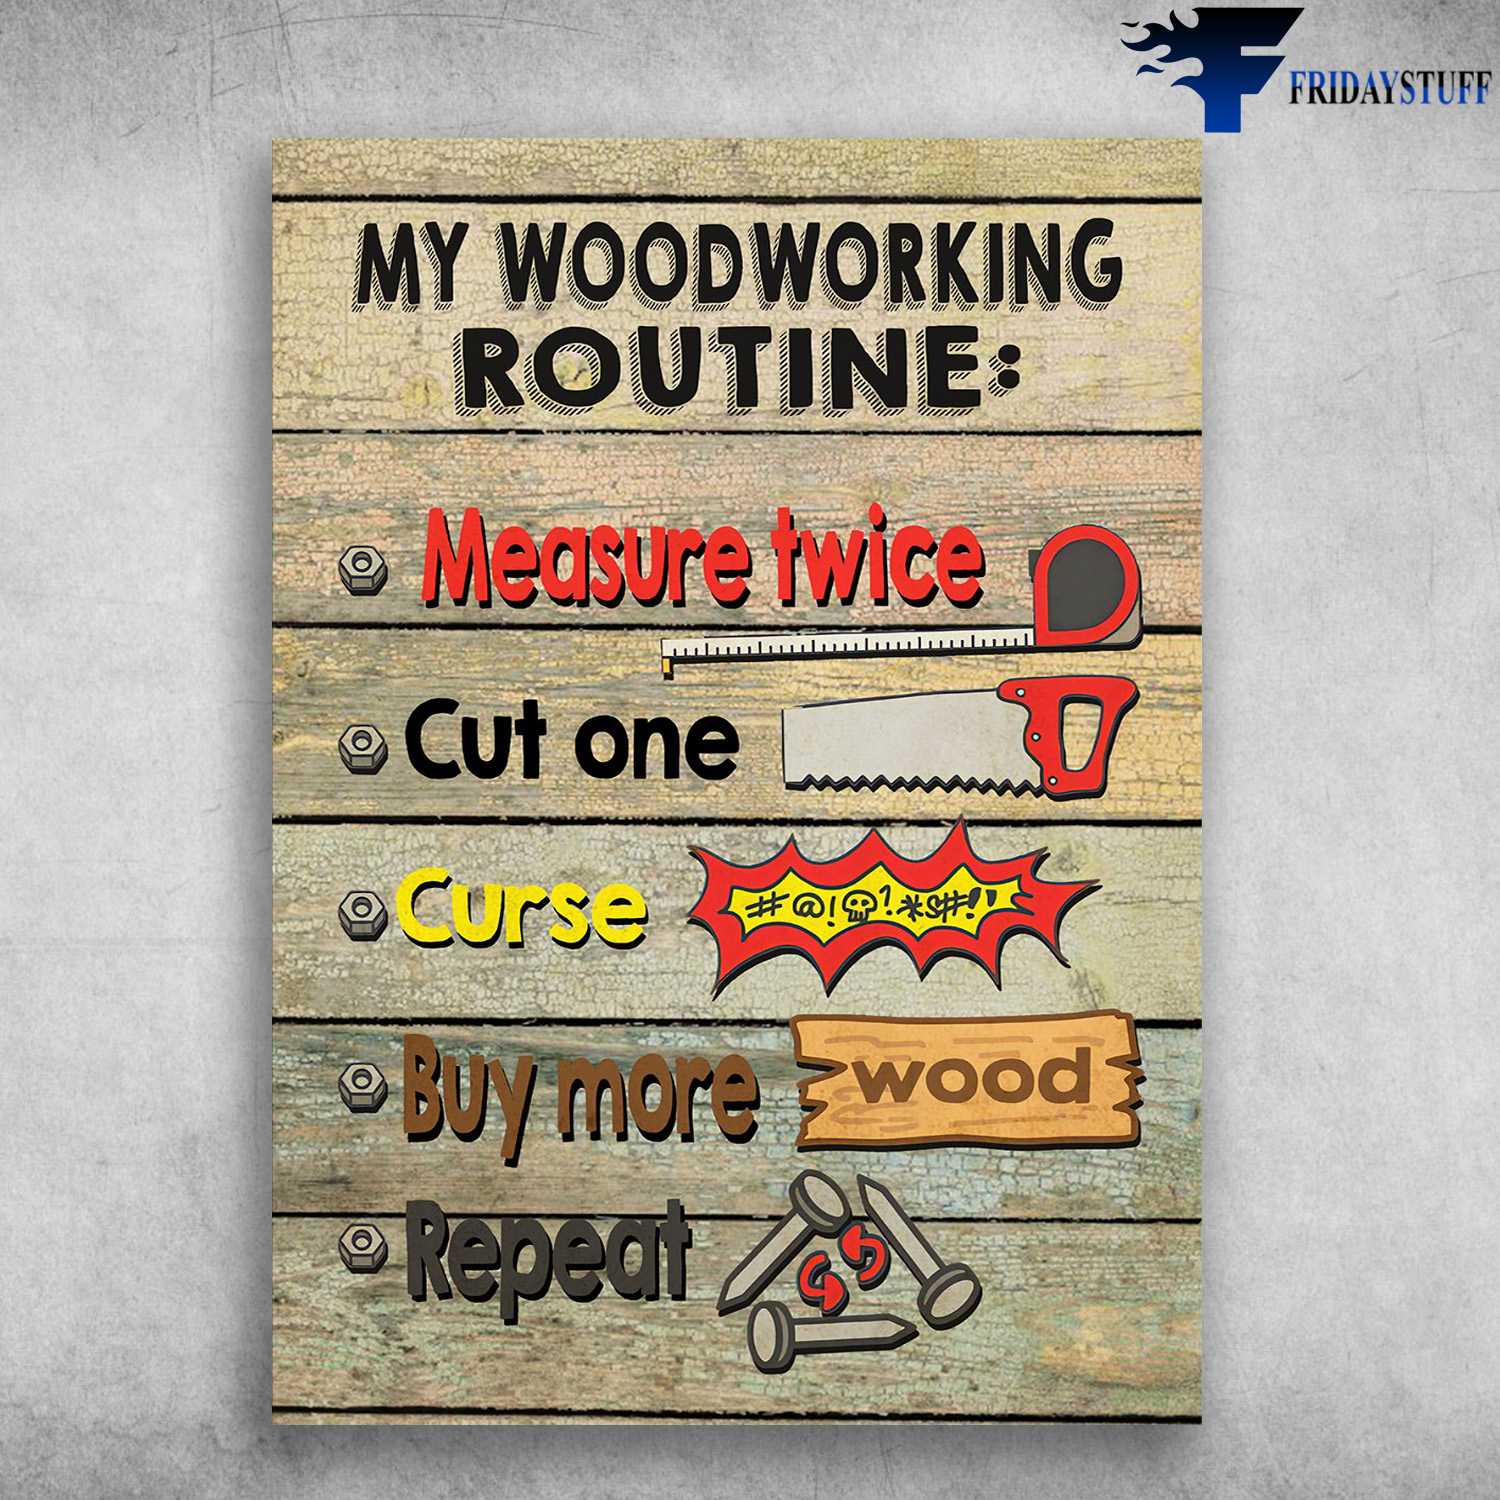 Carpenter Poster - My Woodworking Routine, Measure Twicec, Cut One, Curse, Buy More Wood, Repeat